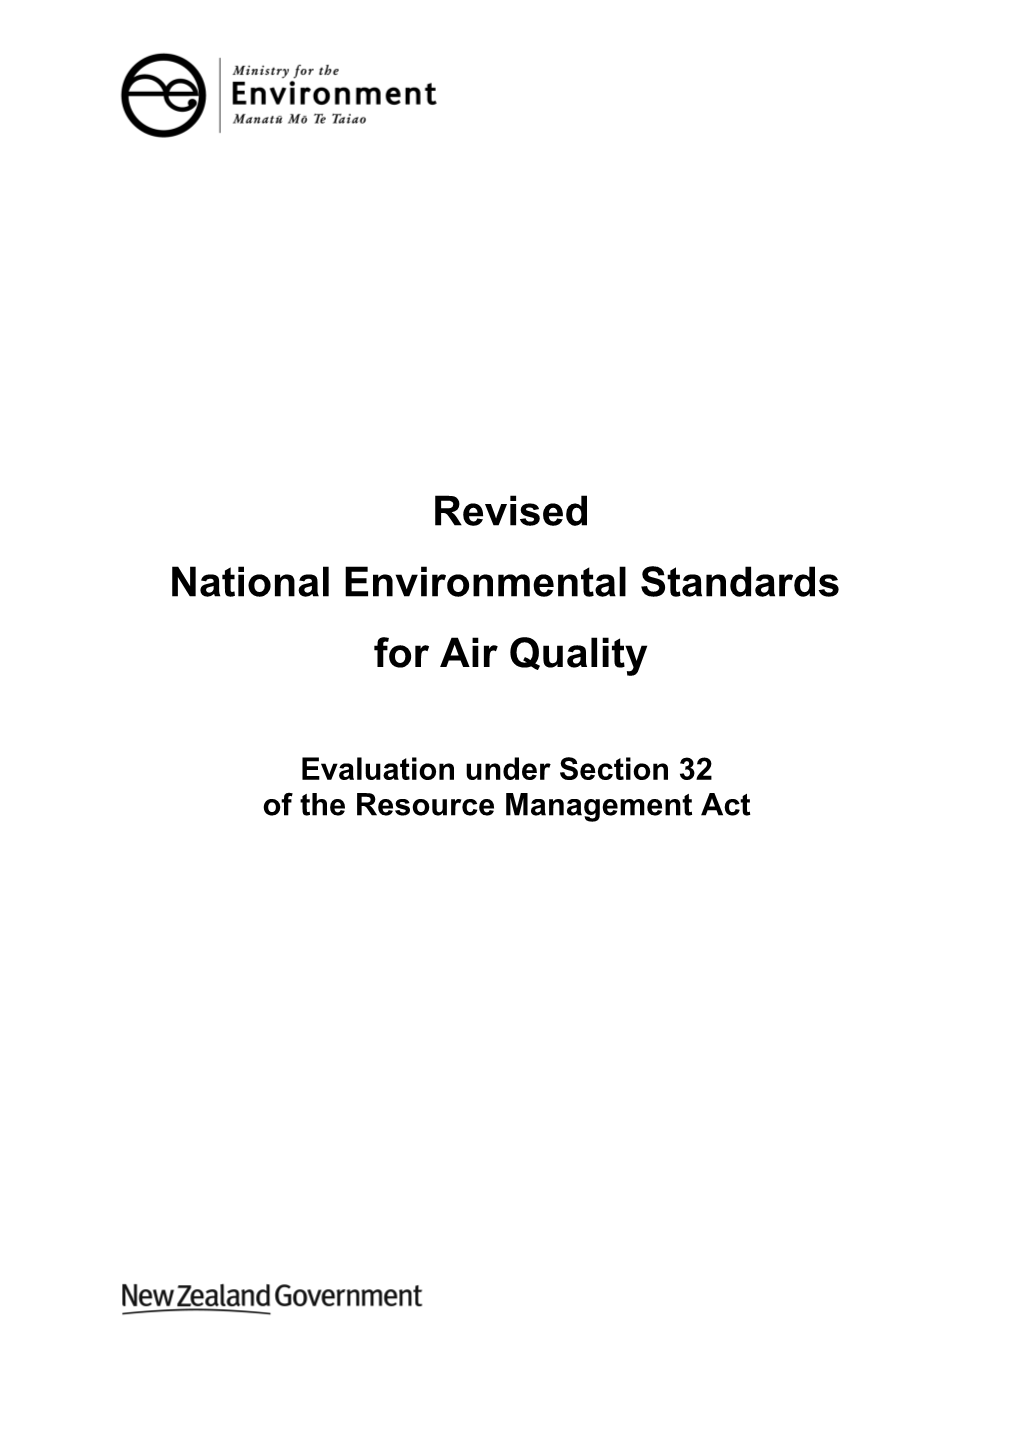 Revised-Nes-Air-Quality-Section32-Final